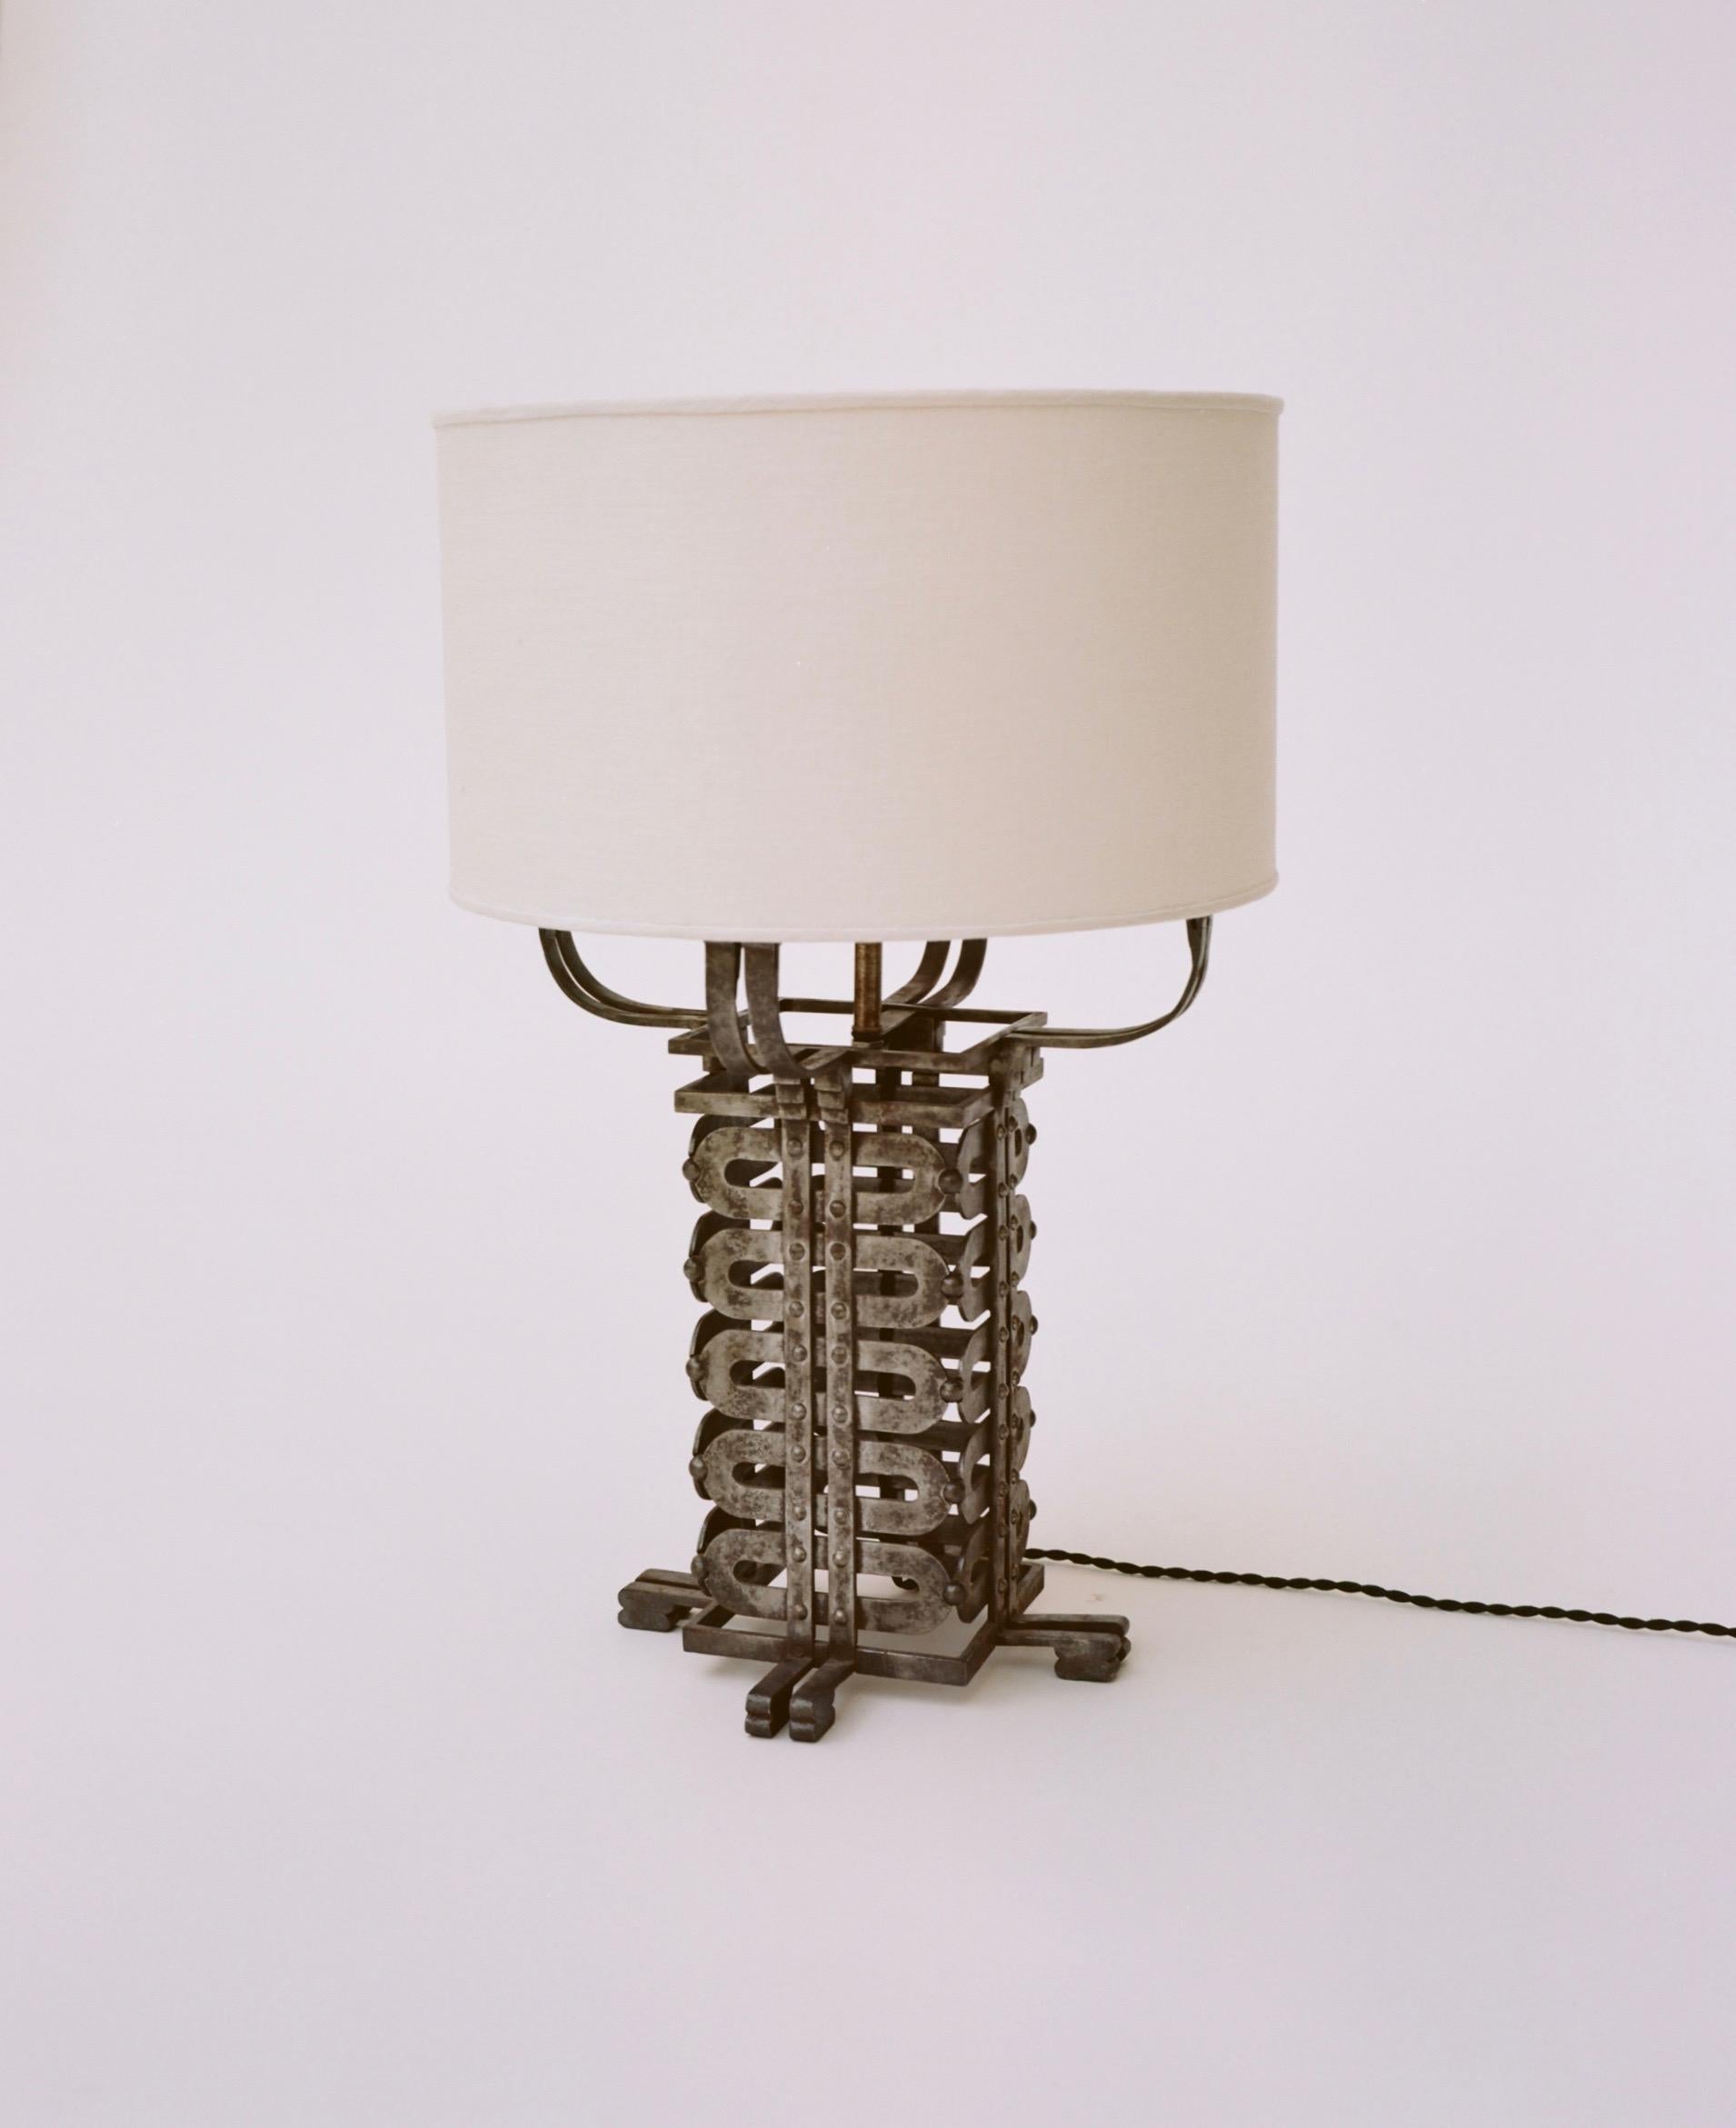 A silver-gilt wrought iron table lamp with cream colored linen shade. Rewired for US outlets and fitted with a custom ivory silk linen shade and cord. Exemplary of the more elaborate, art deco period with far eastern influences. Measurements with